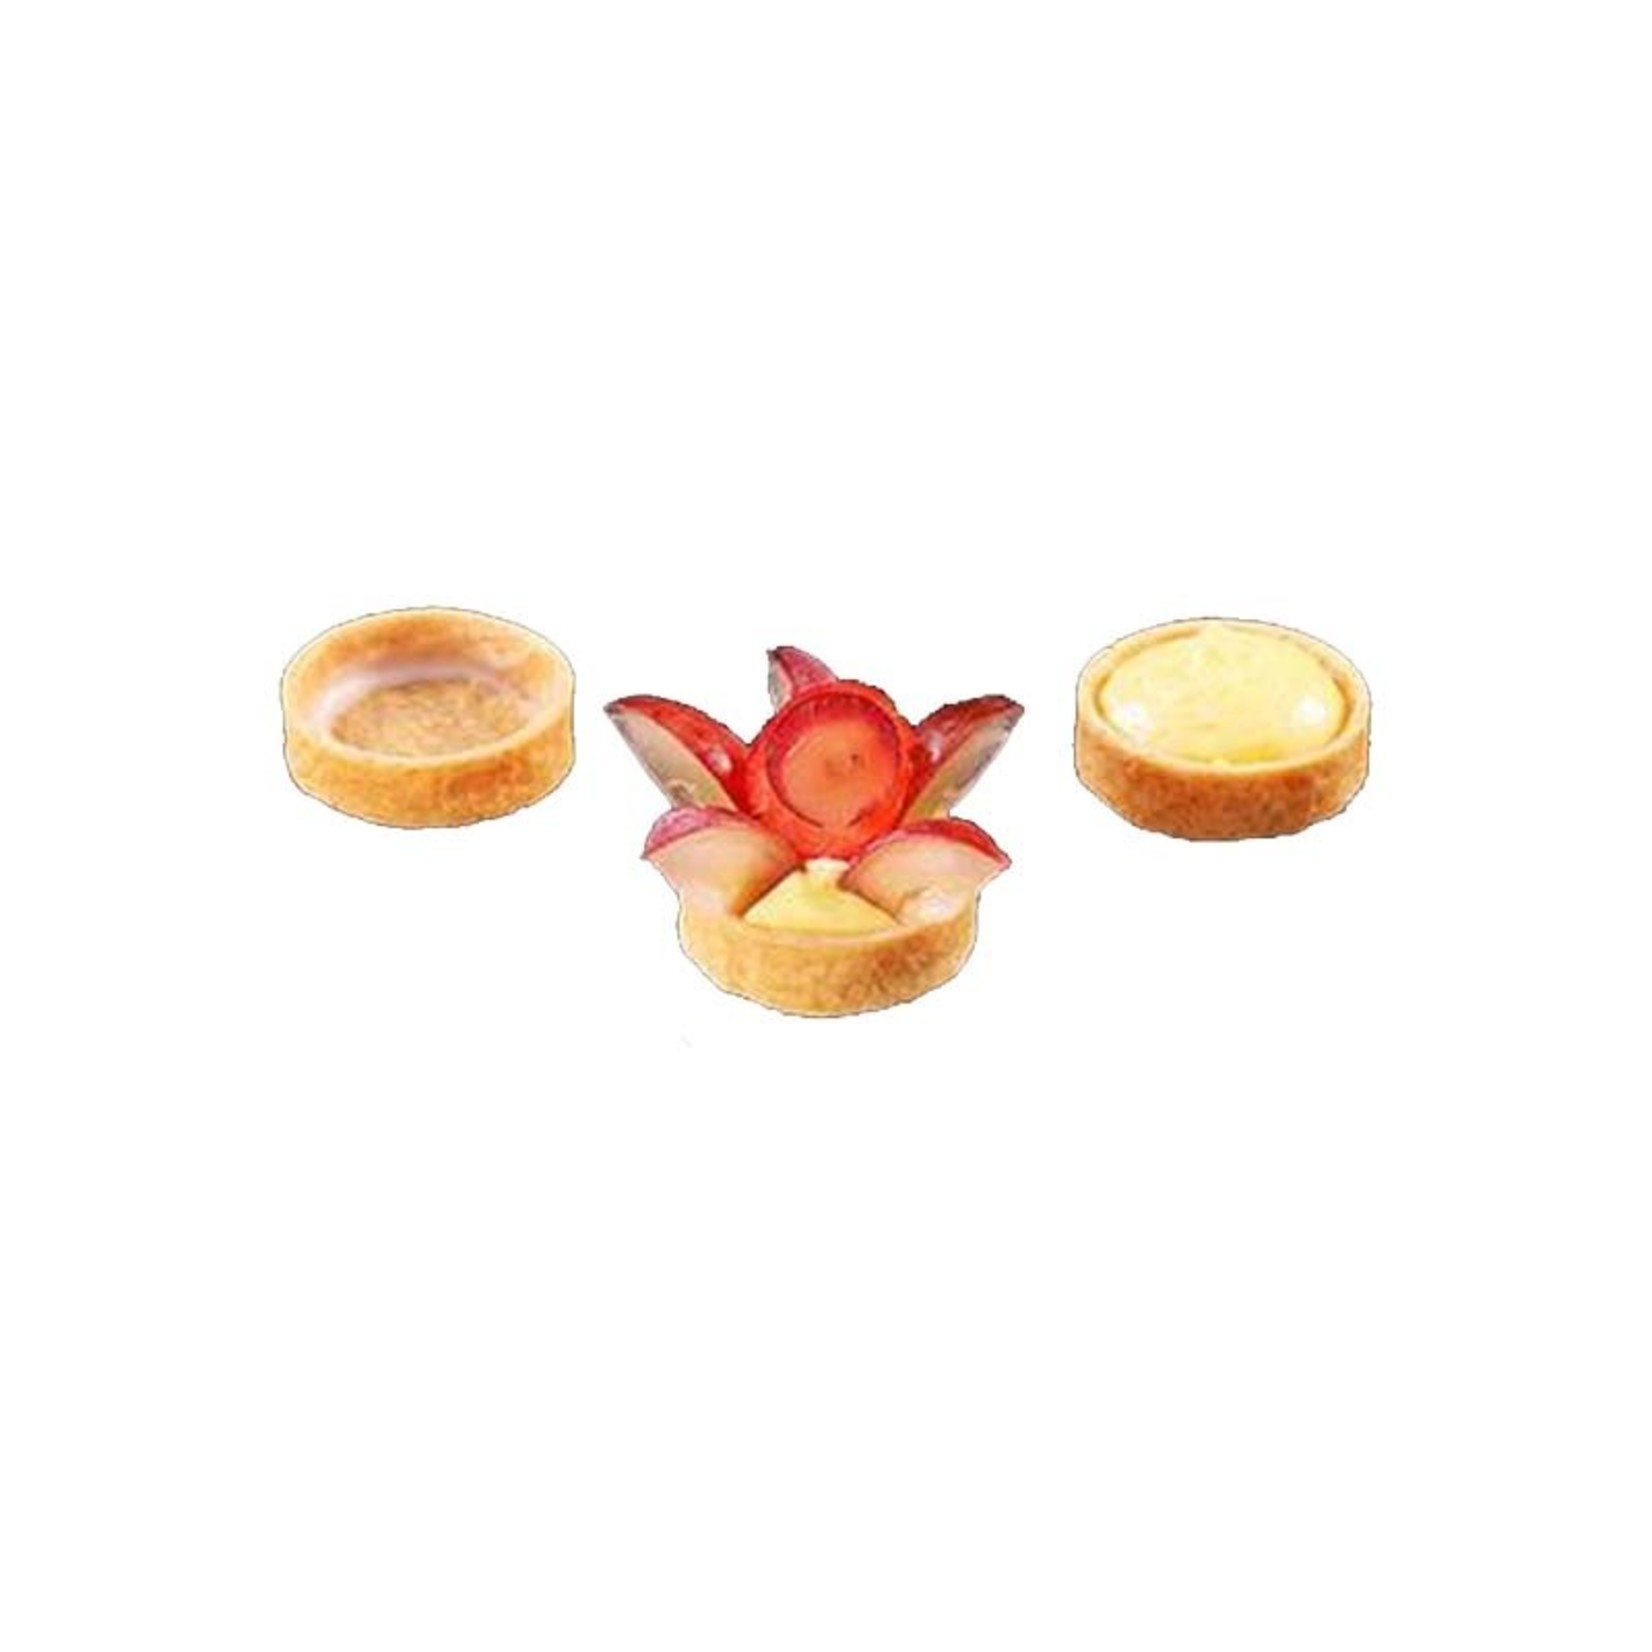 Delifrance Delifrance - Tart shell, Sweet round - 2'' (100ct), 78442